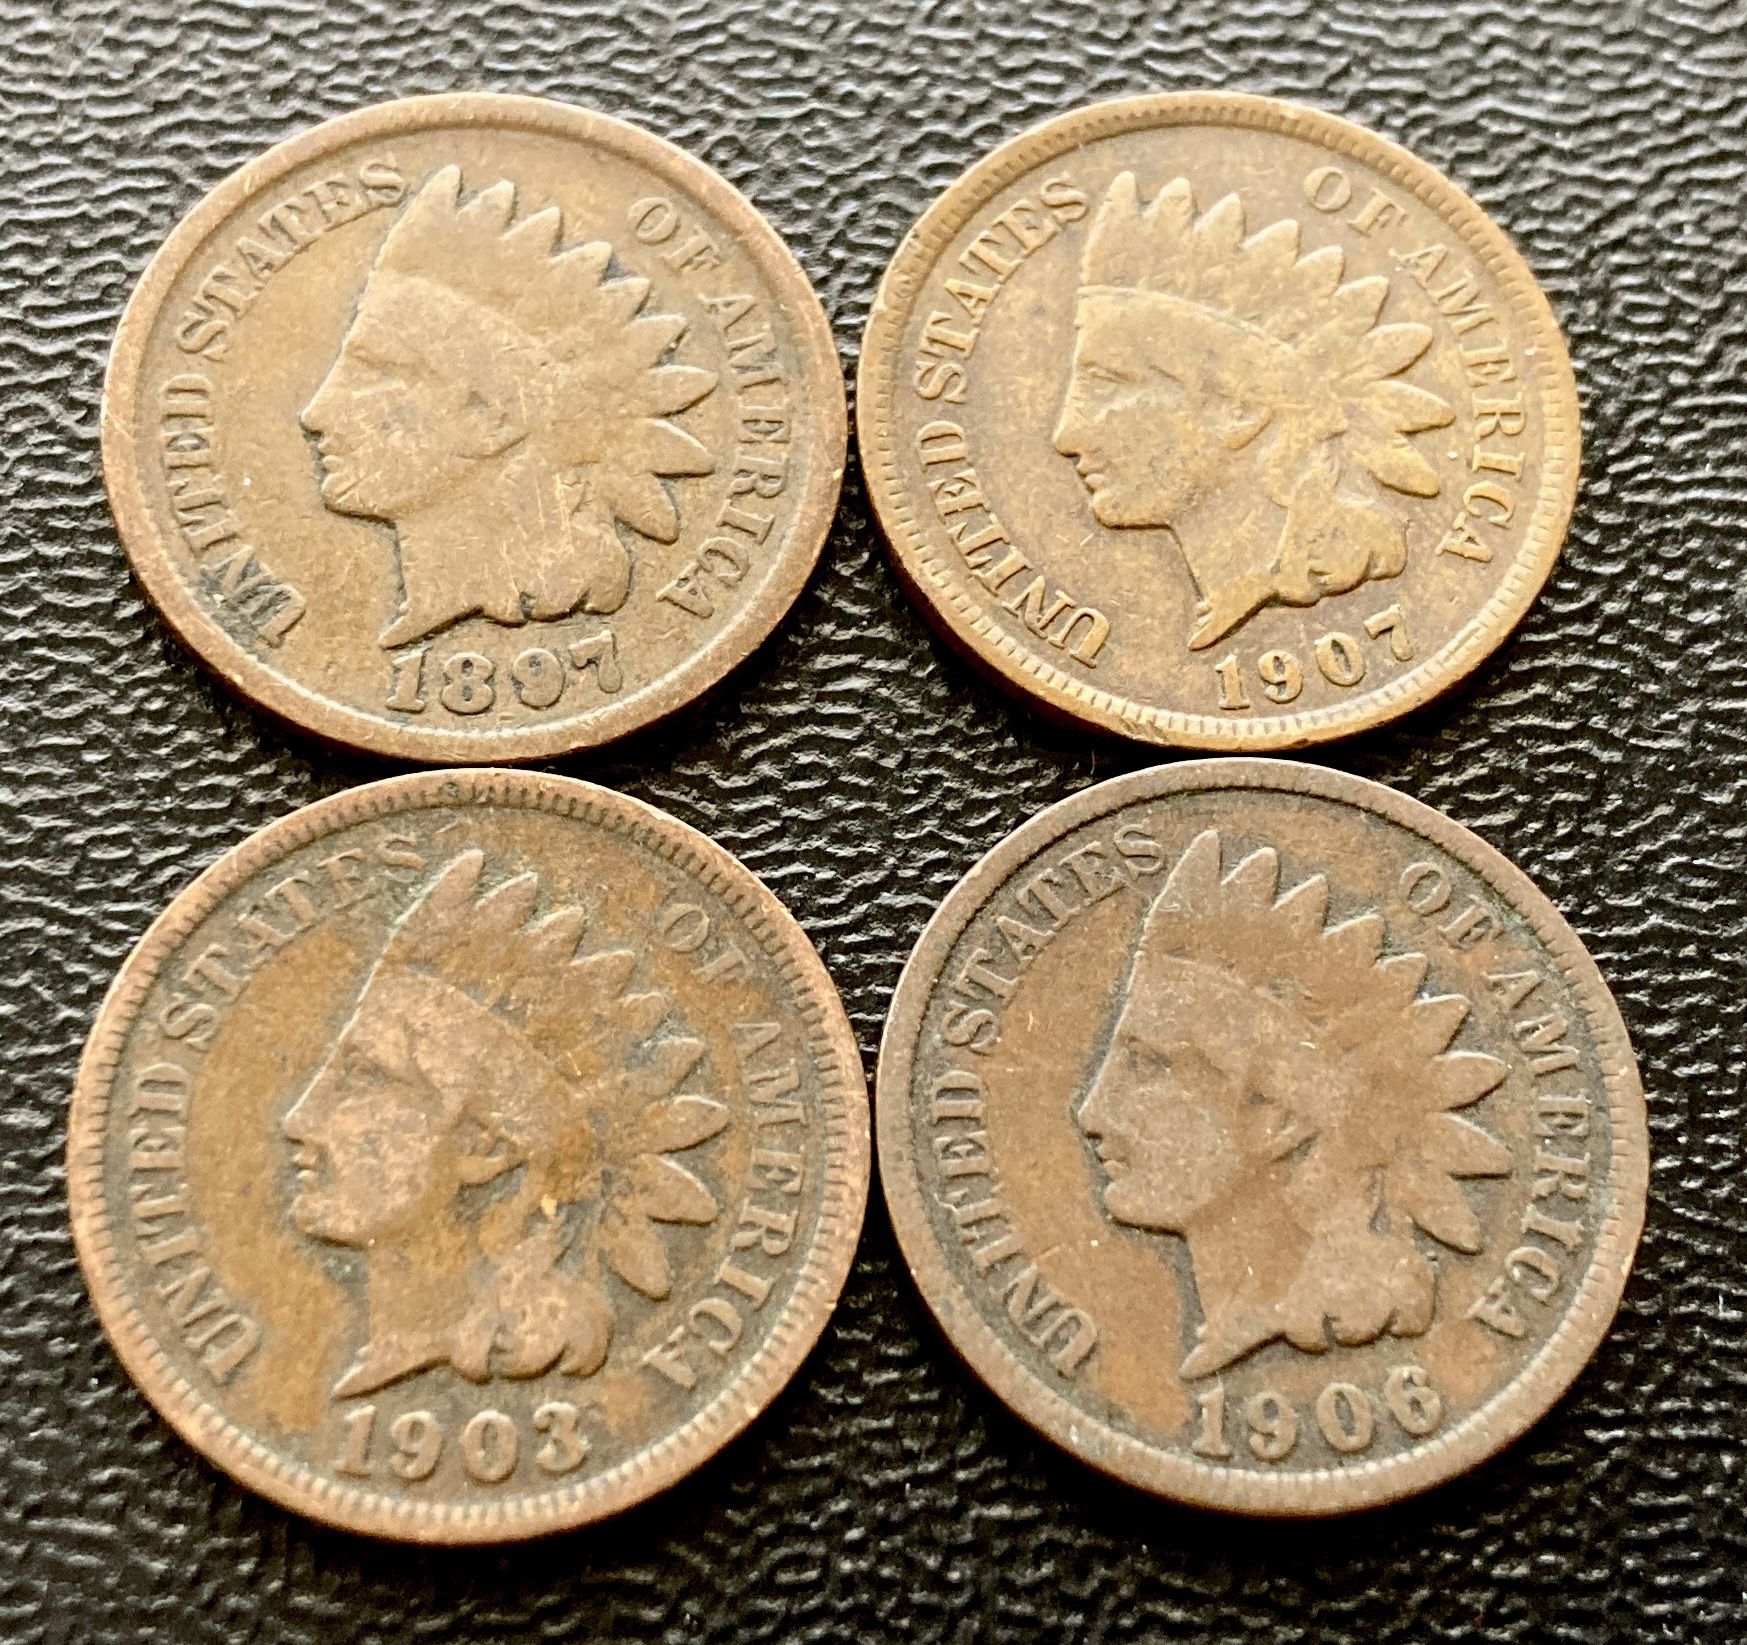 Four (4) Indian Head Pennies Vintage Antique US Cent Coins Over 100 Years Old 